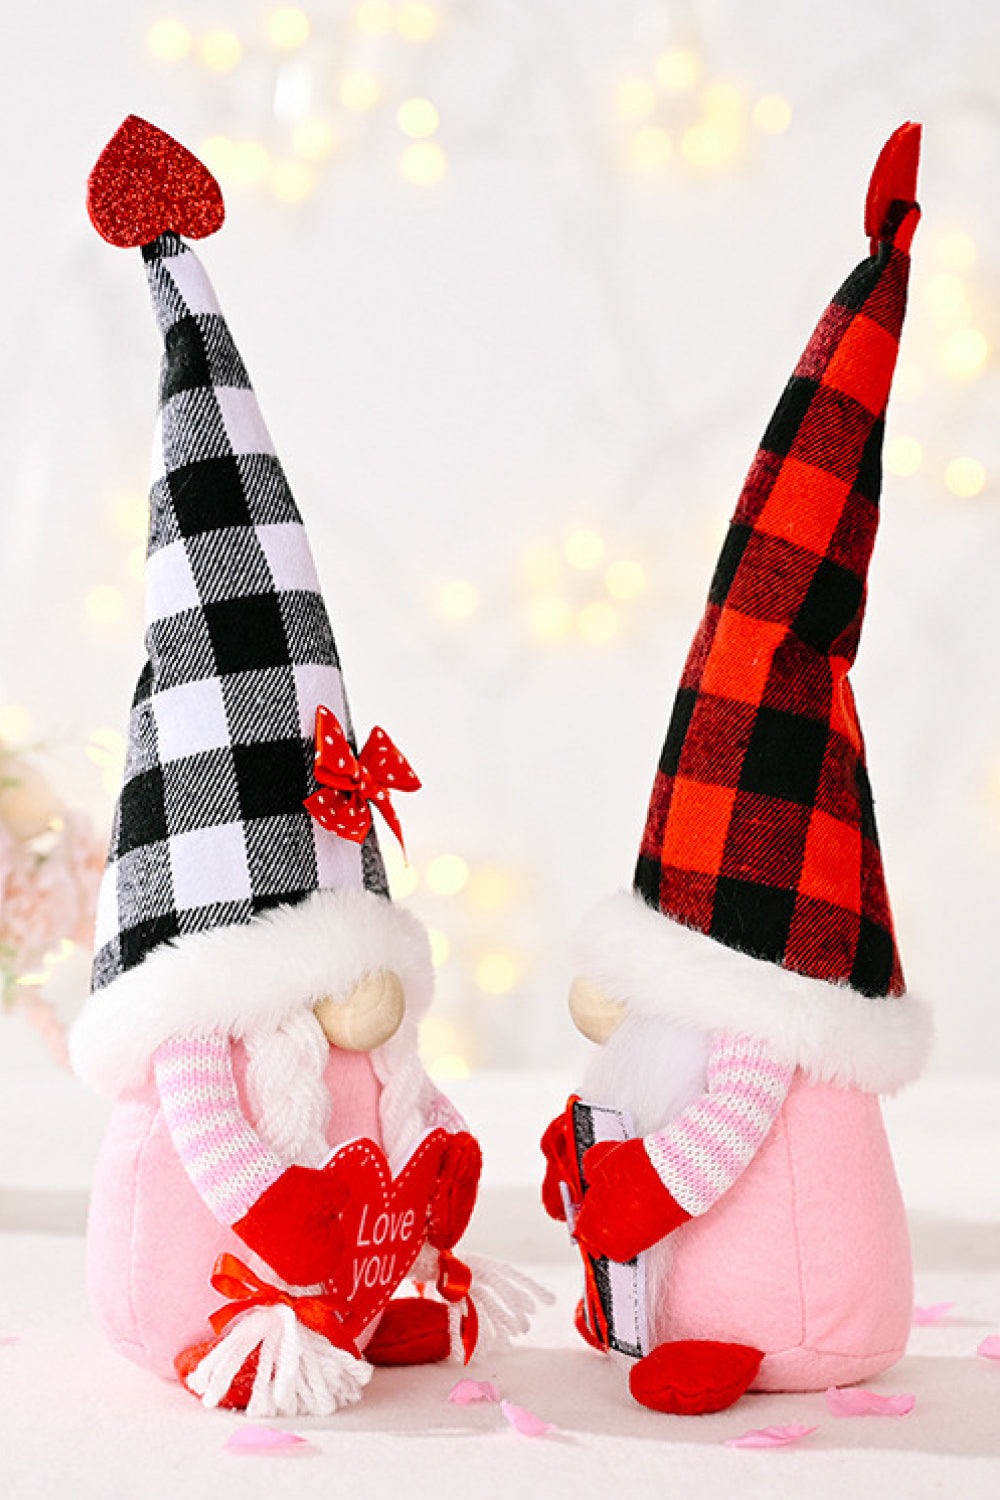 GNOME COLLECTIBLES--Plaid Pointed Hat Gnome, fun, collectible gnomes (1 PC) choose from two options